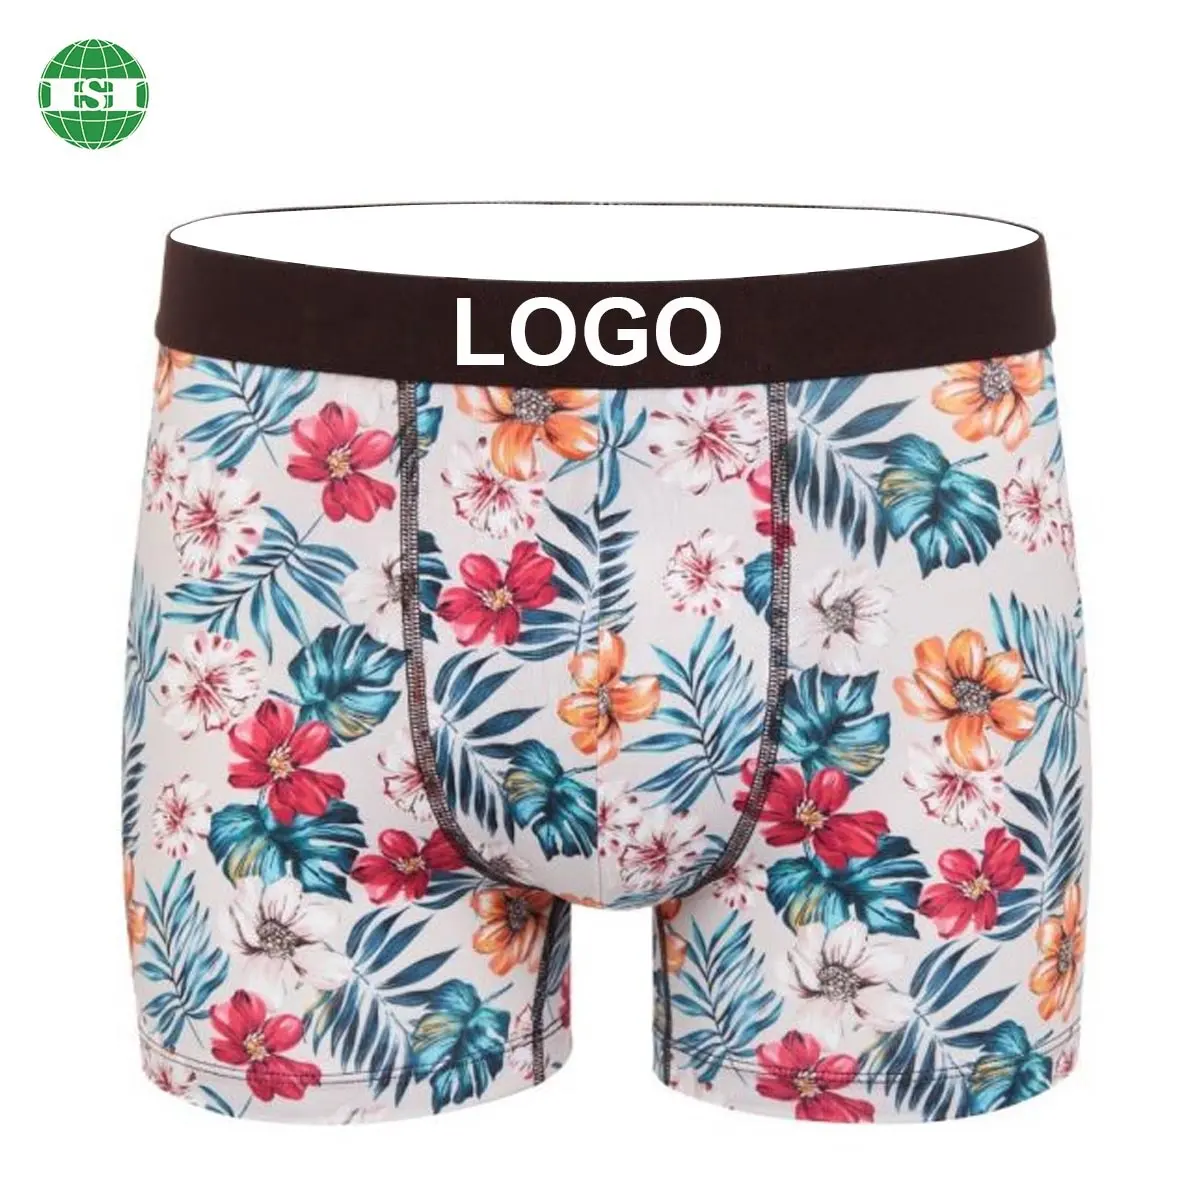 Custom floral print men's underwear trunks all over printed with your own logo brand name on waistband